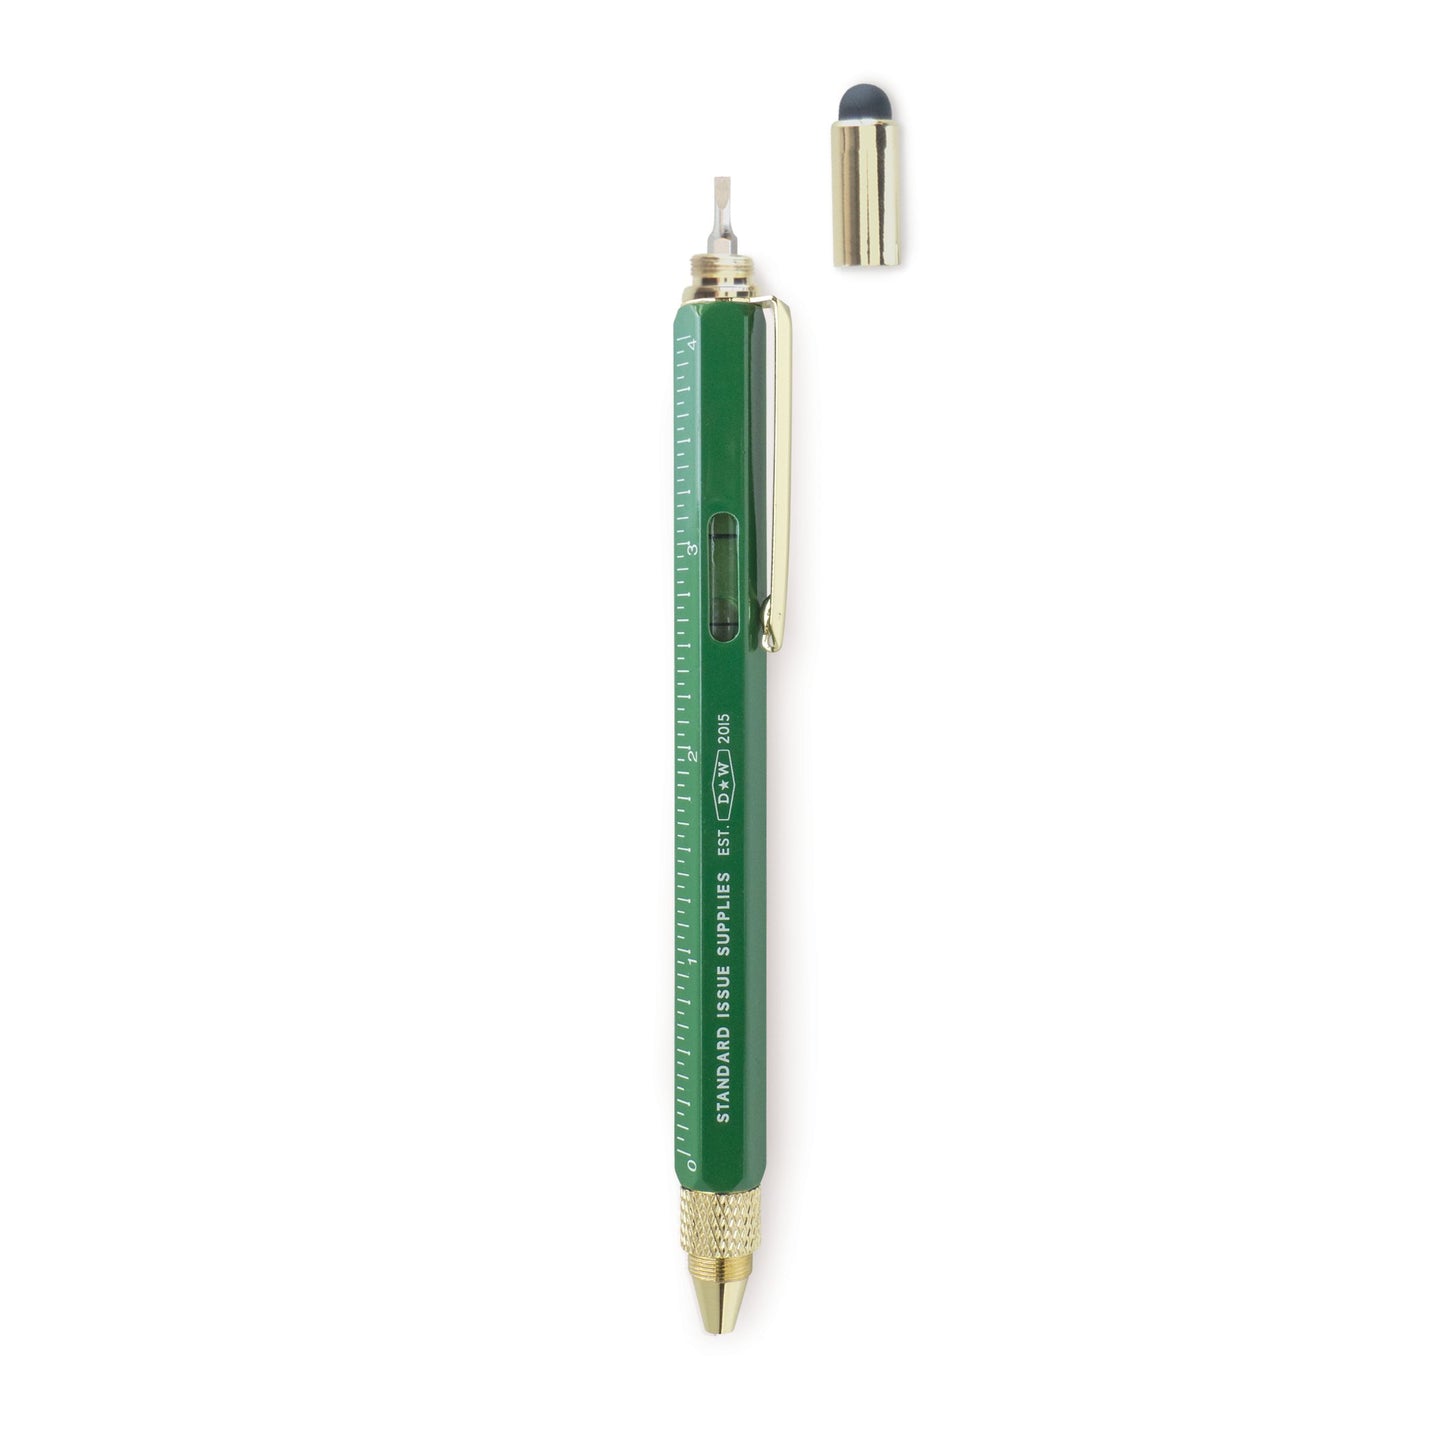 Standard Issue Multi-Tool Pen - Scout Green